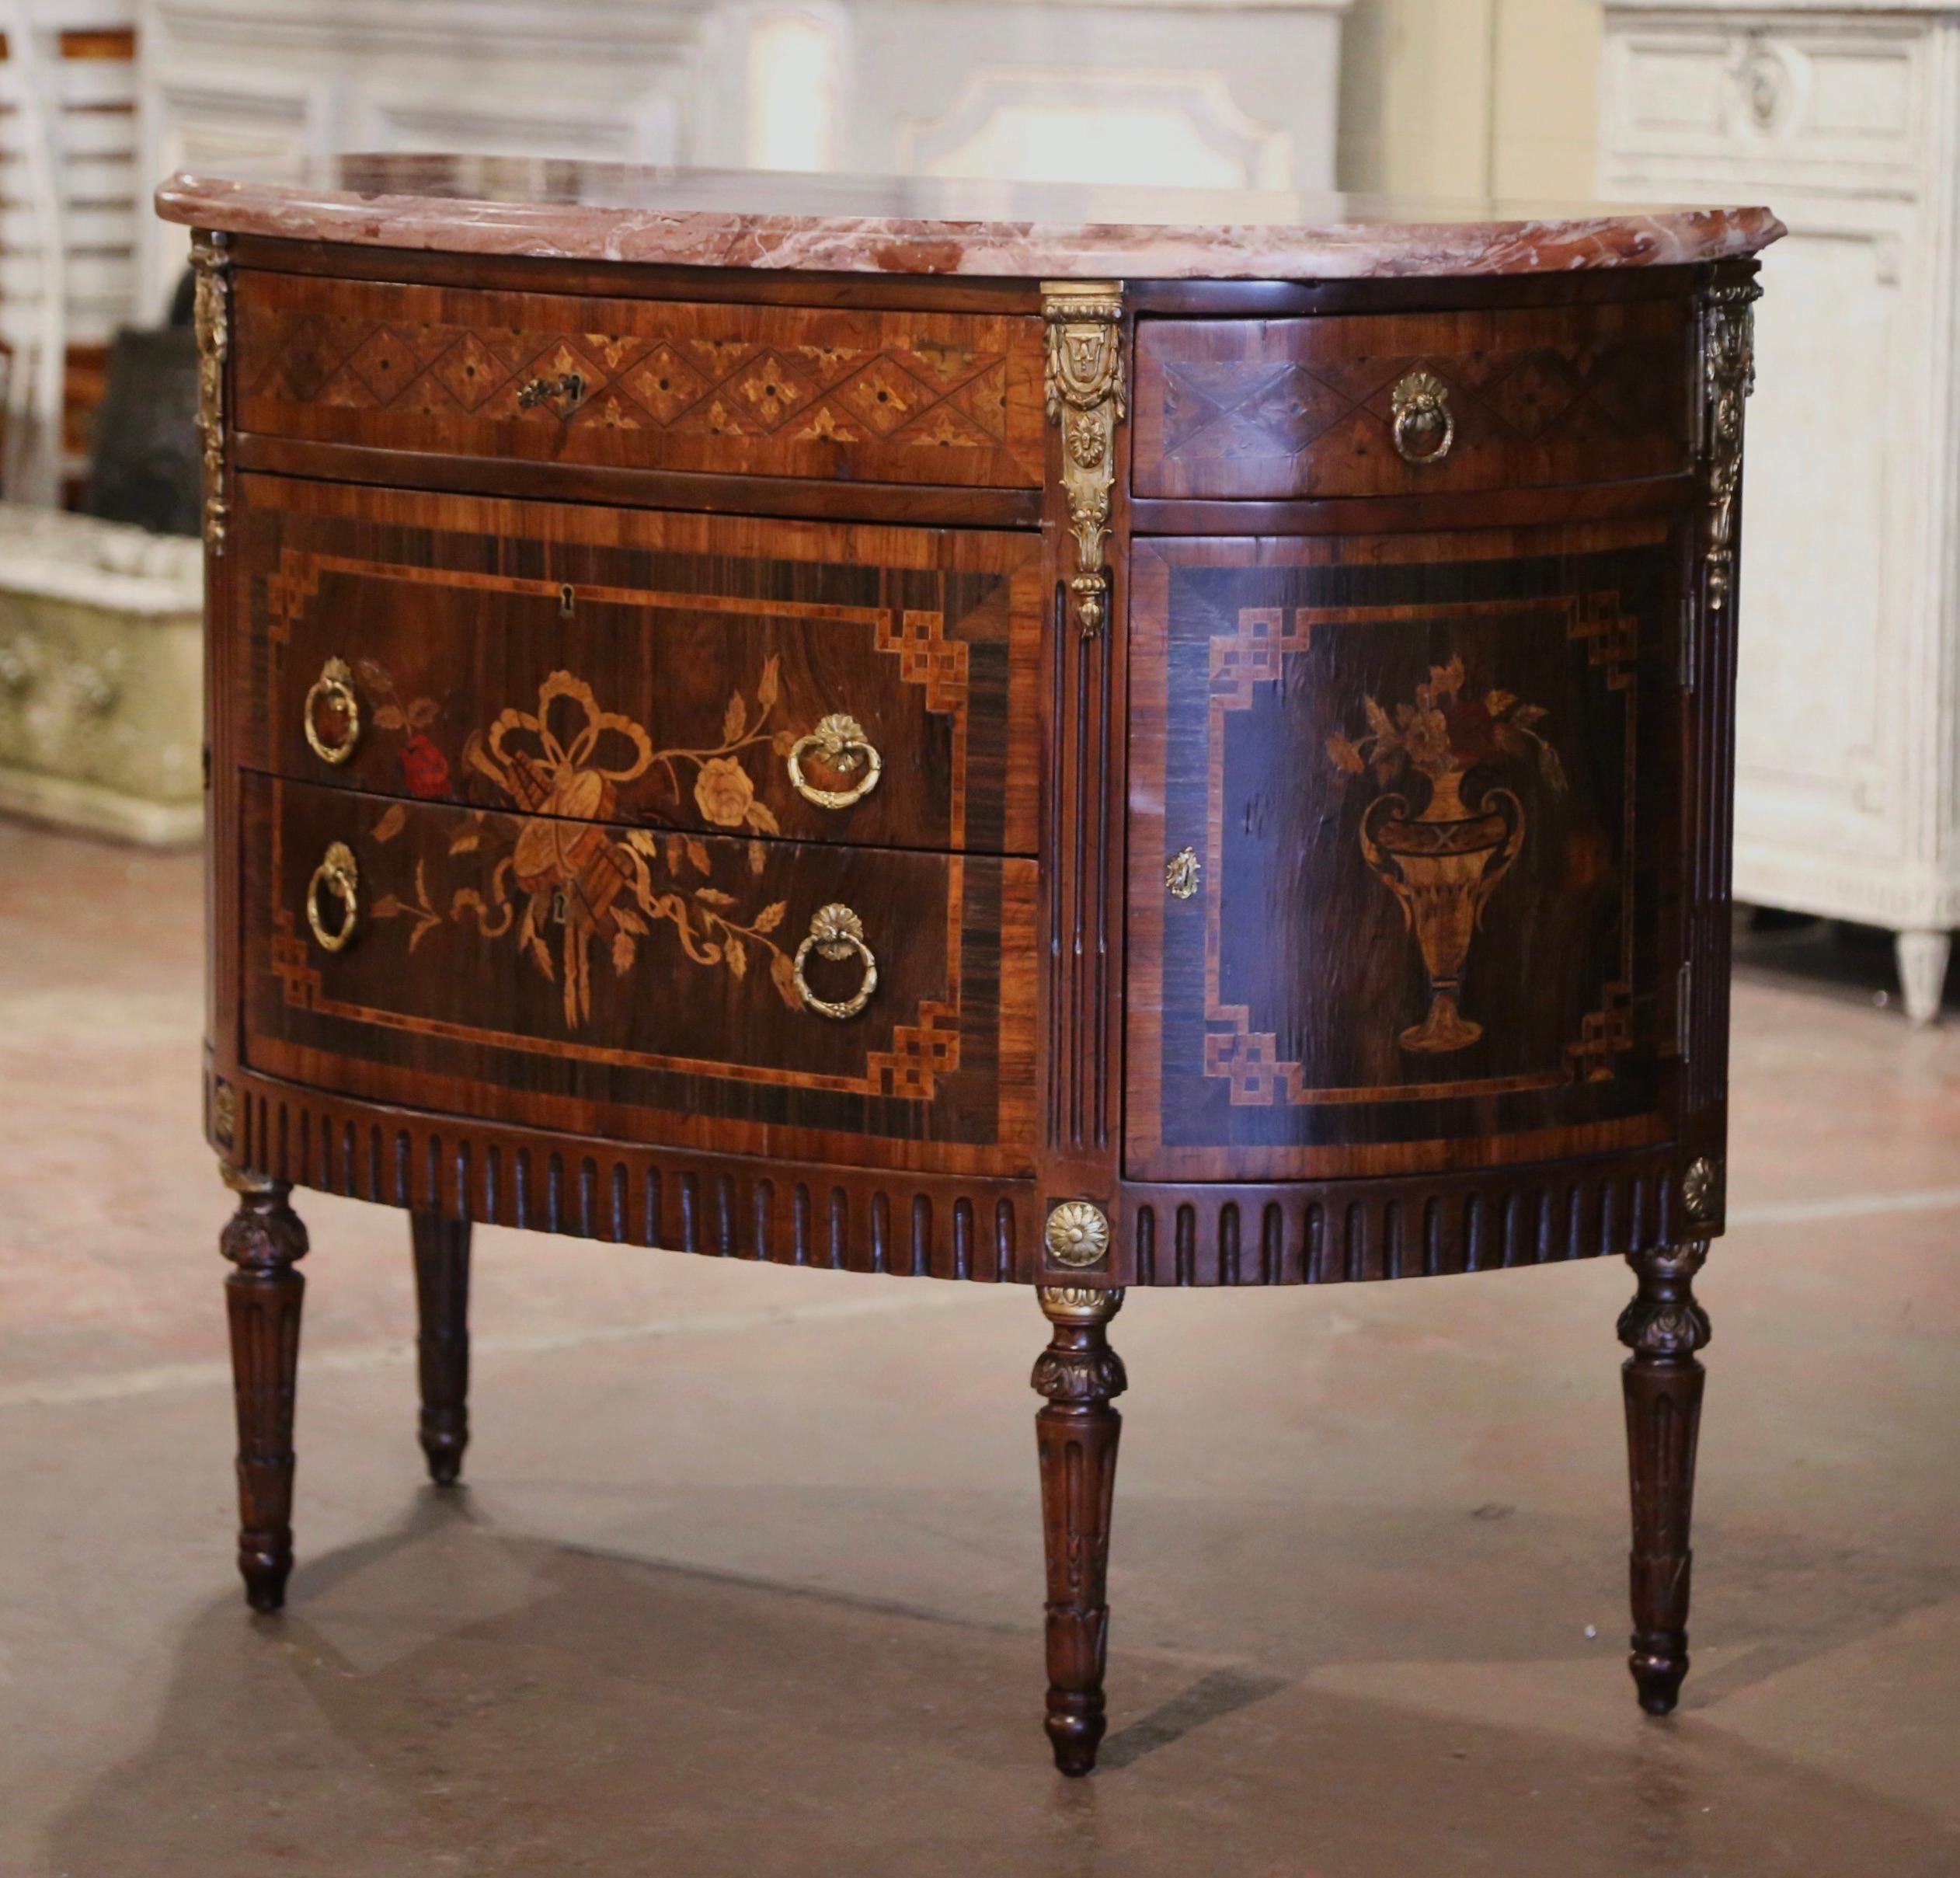 Invite Classic French elegance into your home with this Louis XVI style fruitwood bombe chest of drawers. Crafted in Paris, circa 1880 and built of mahogany wood with ormolu trim accents, the commode stands on fluted and tapered legs decorated with